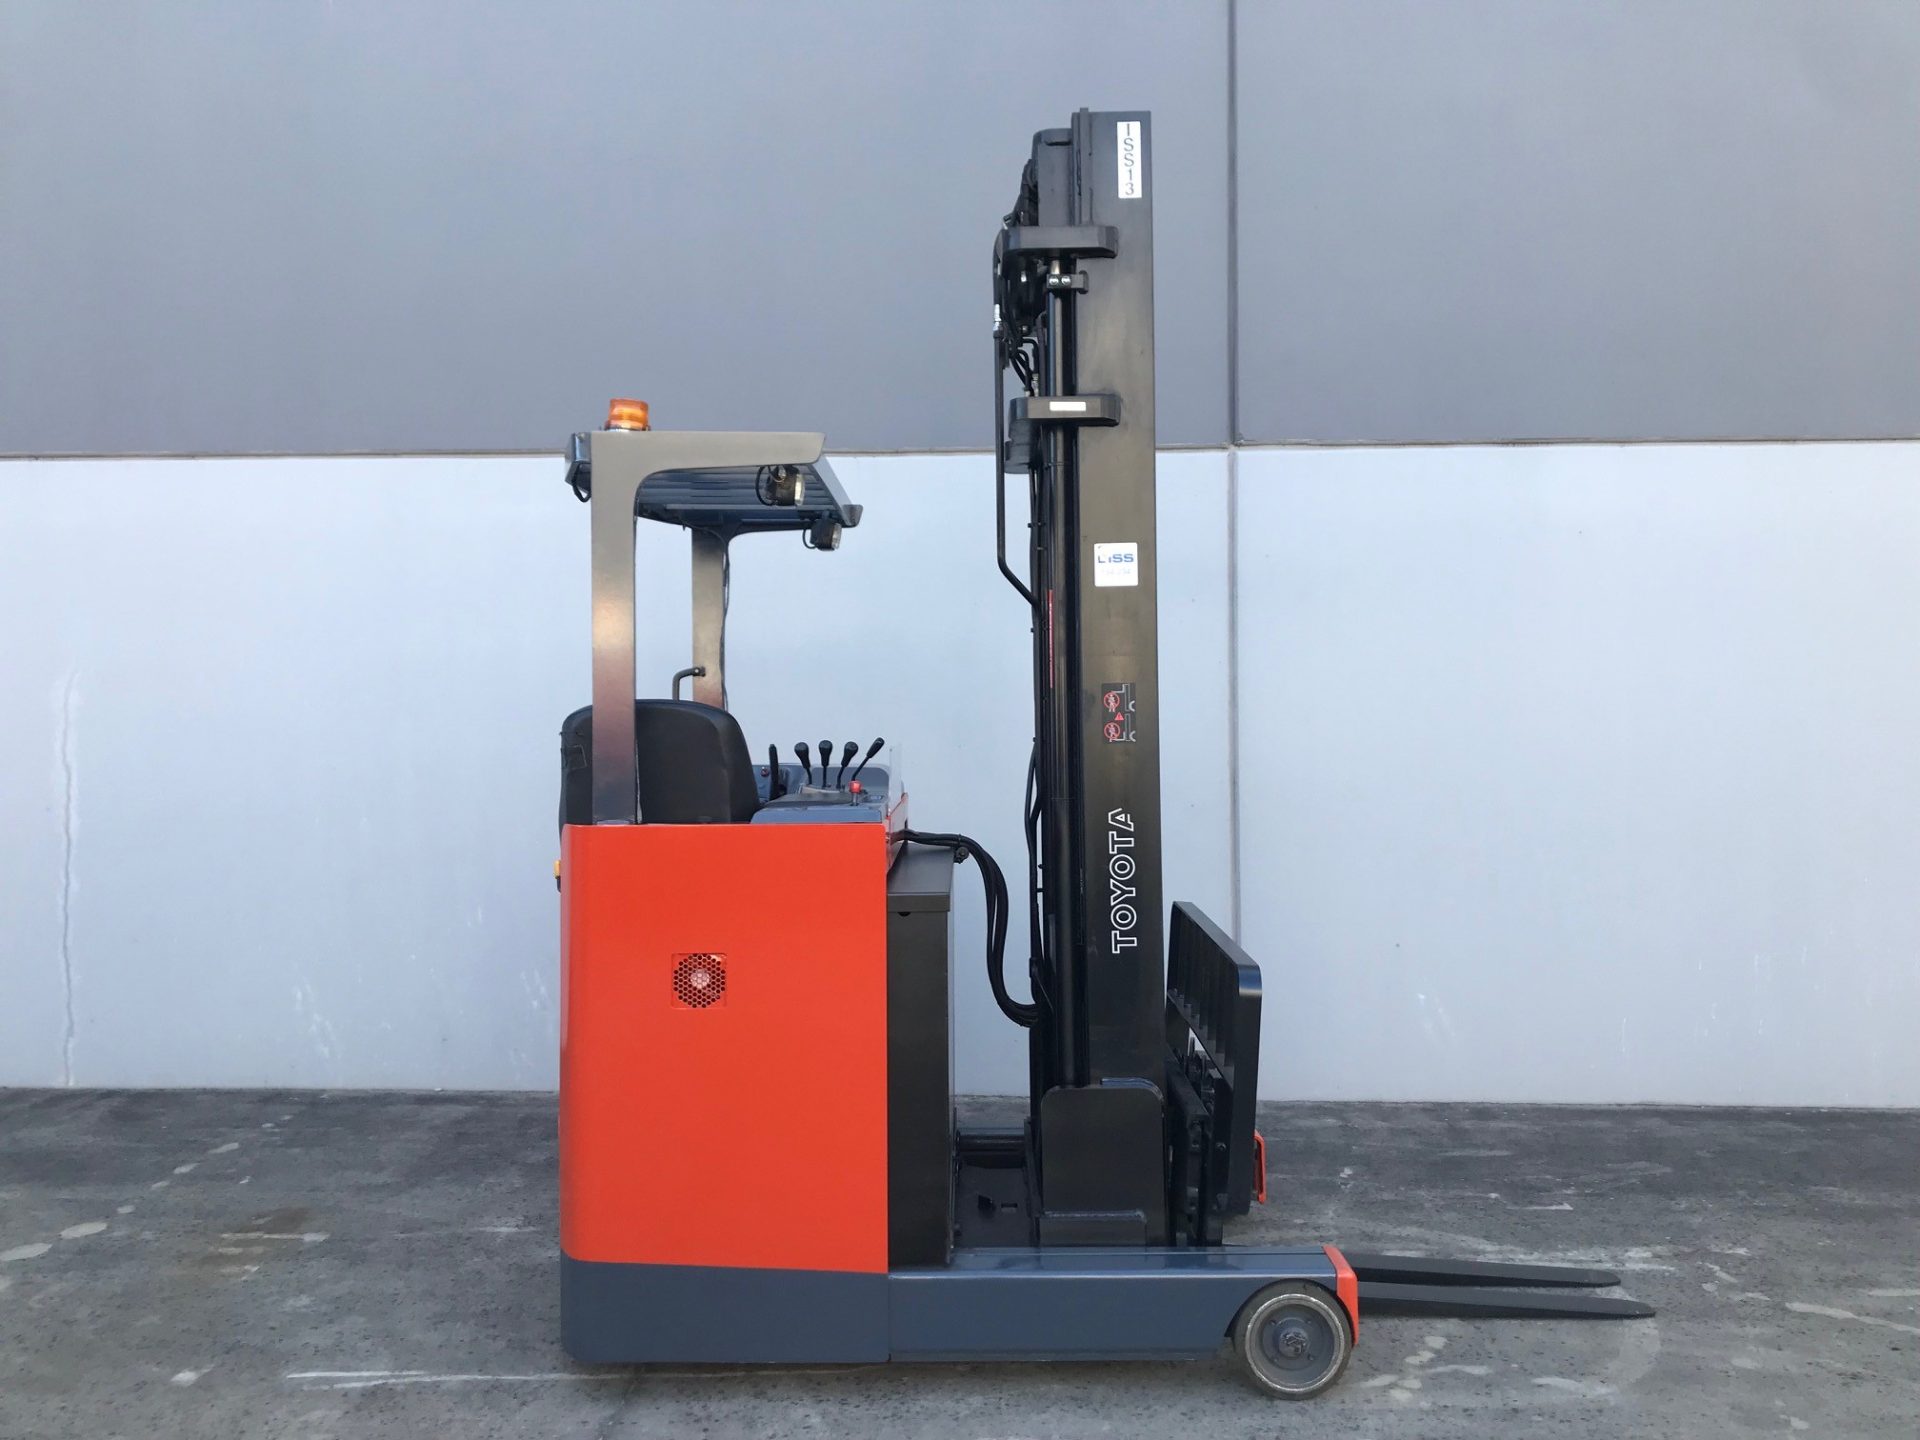 Preowned Forklifts Melbourne